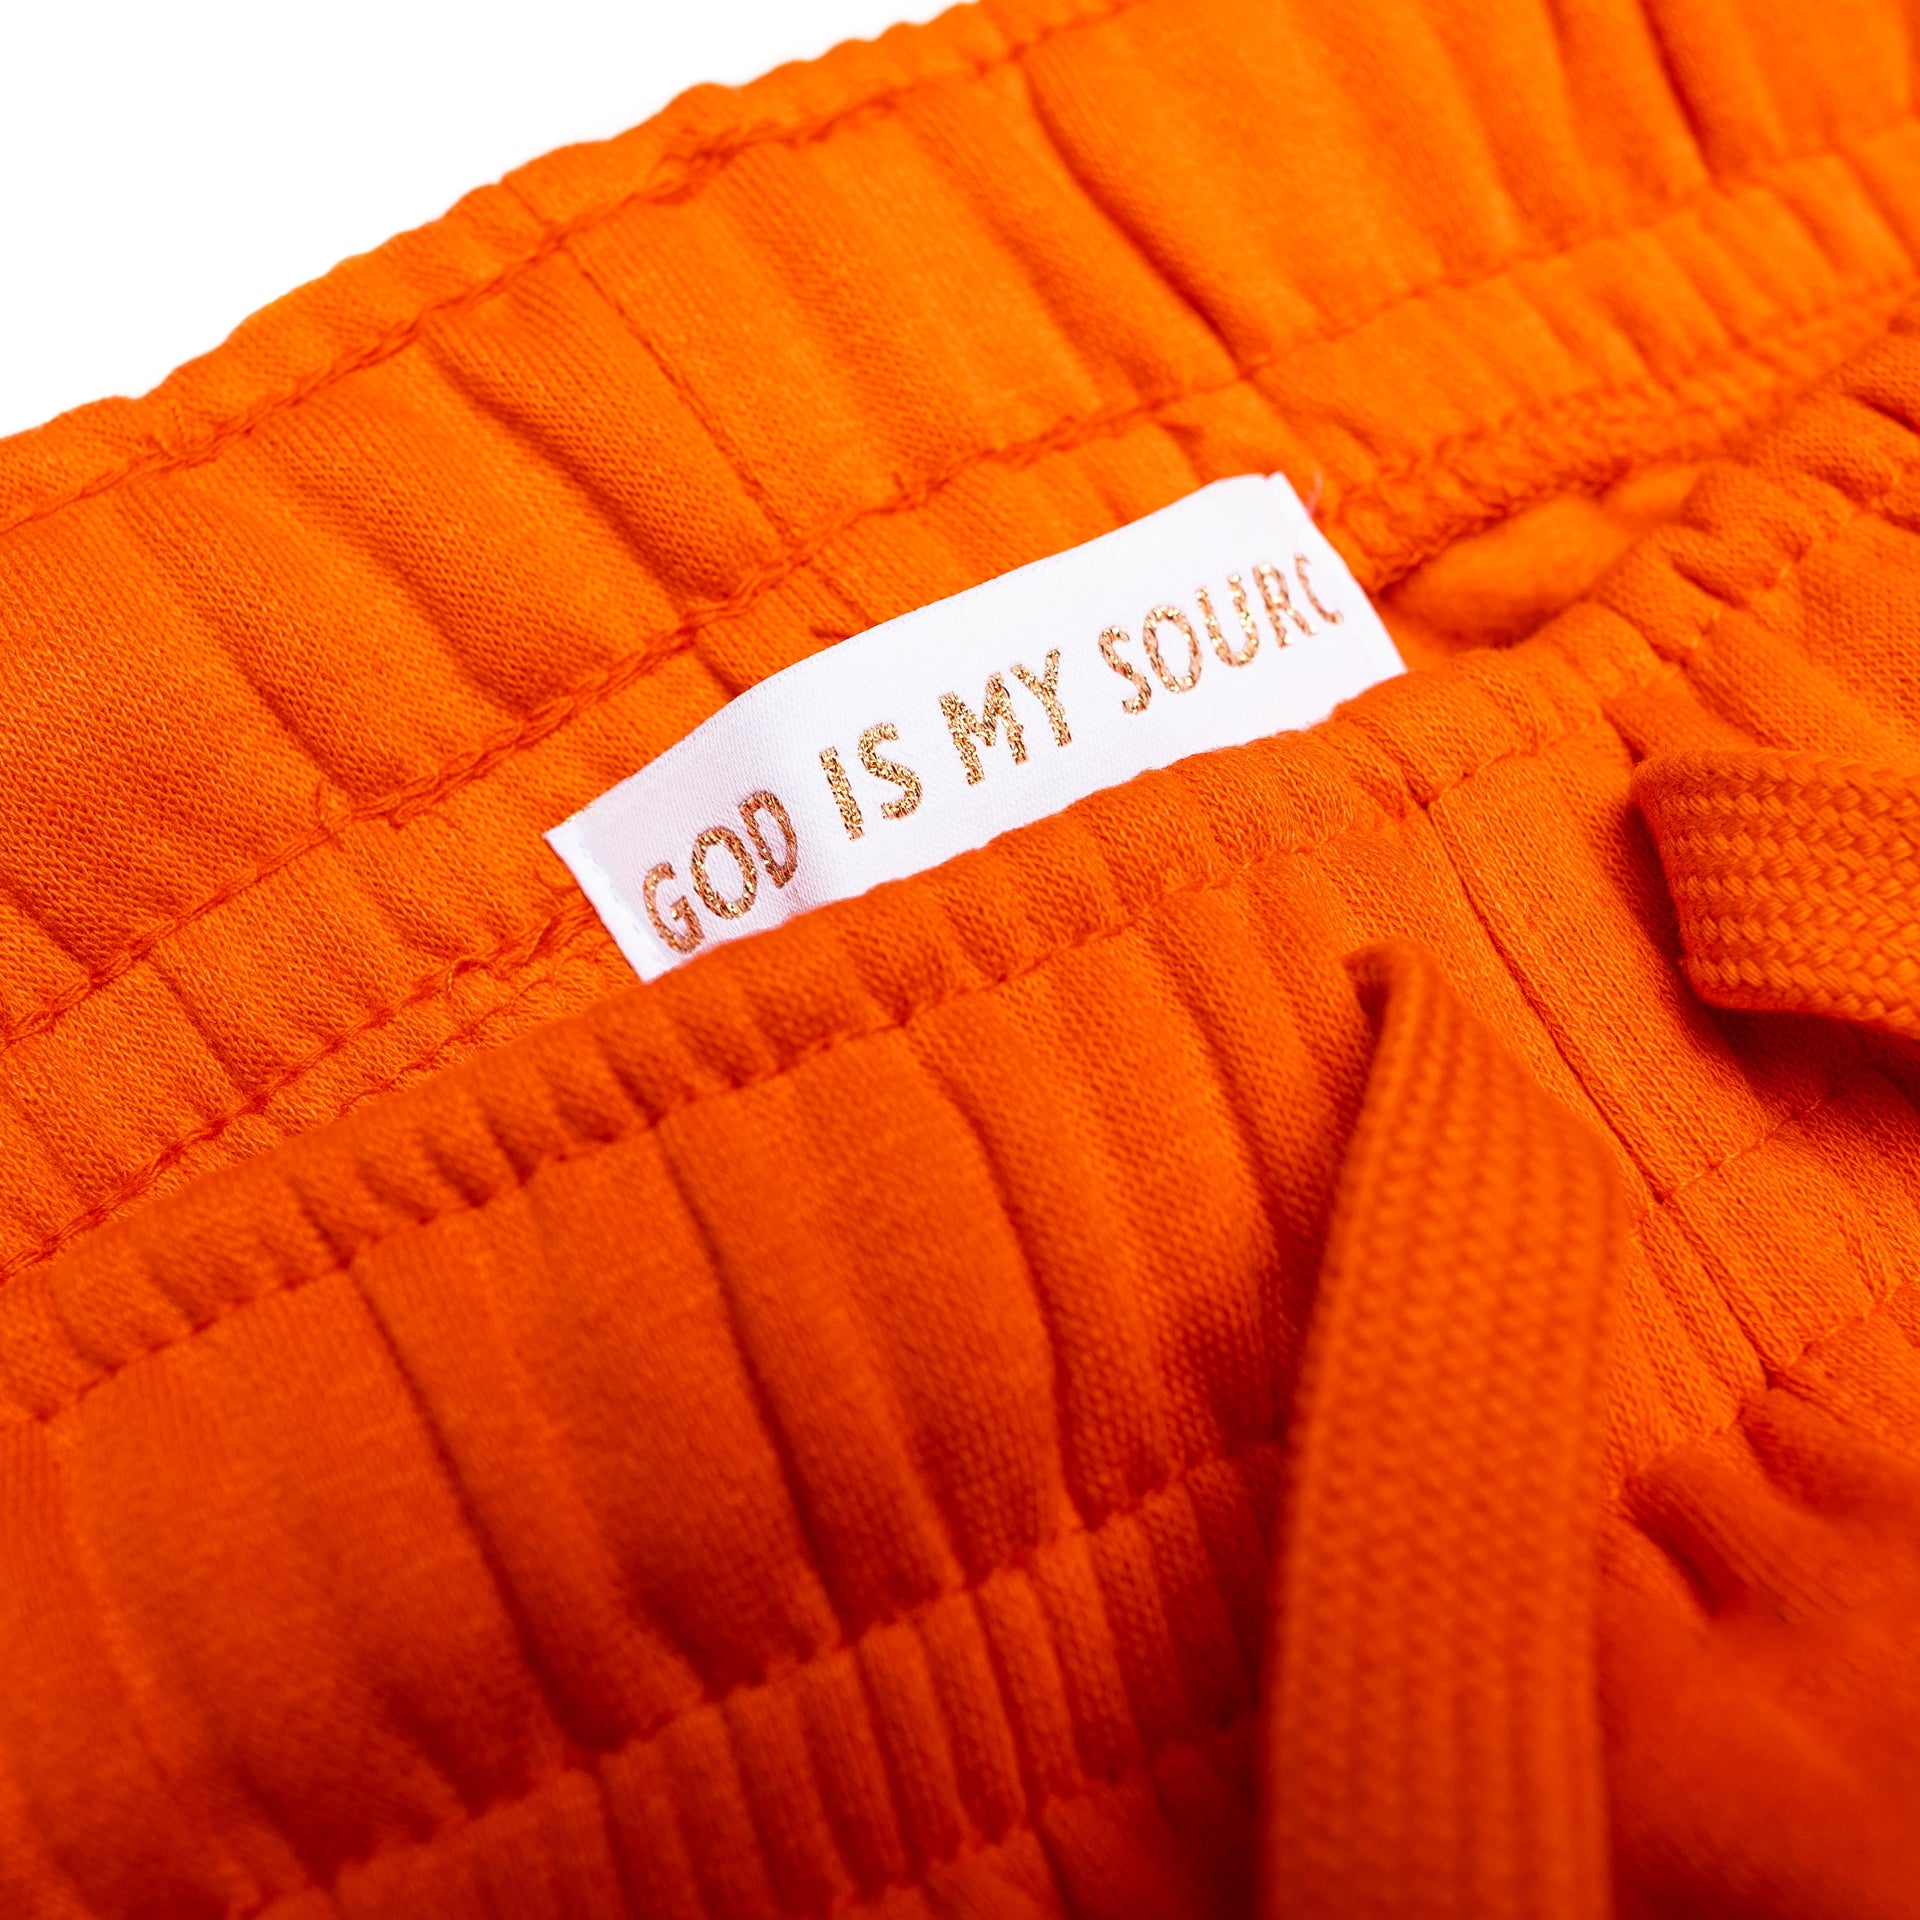 God Is My Source 'Campus' Joggers Orange / White - God Is My Source